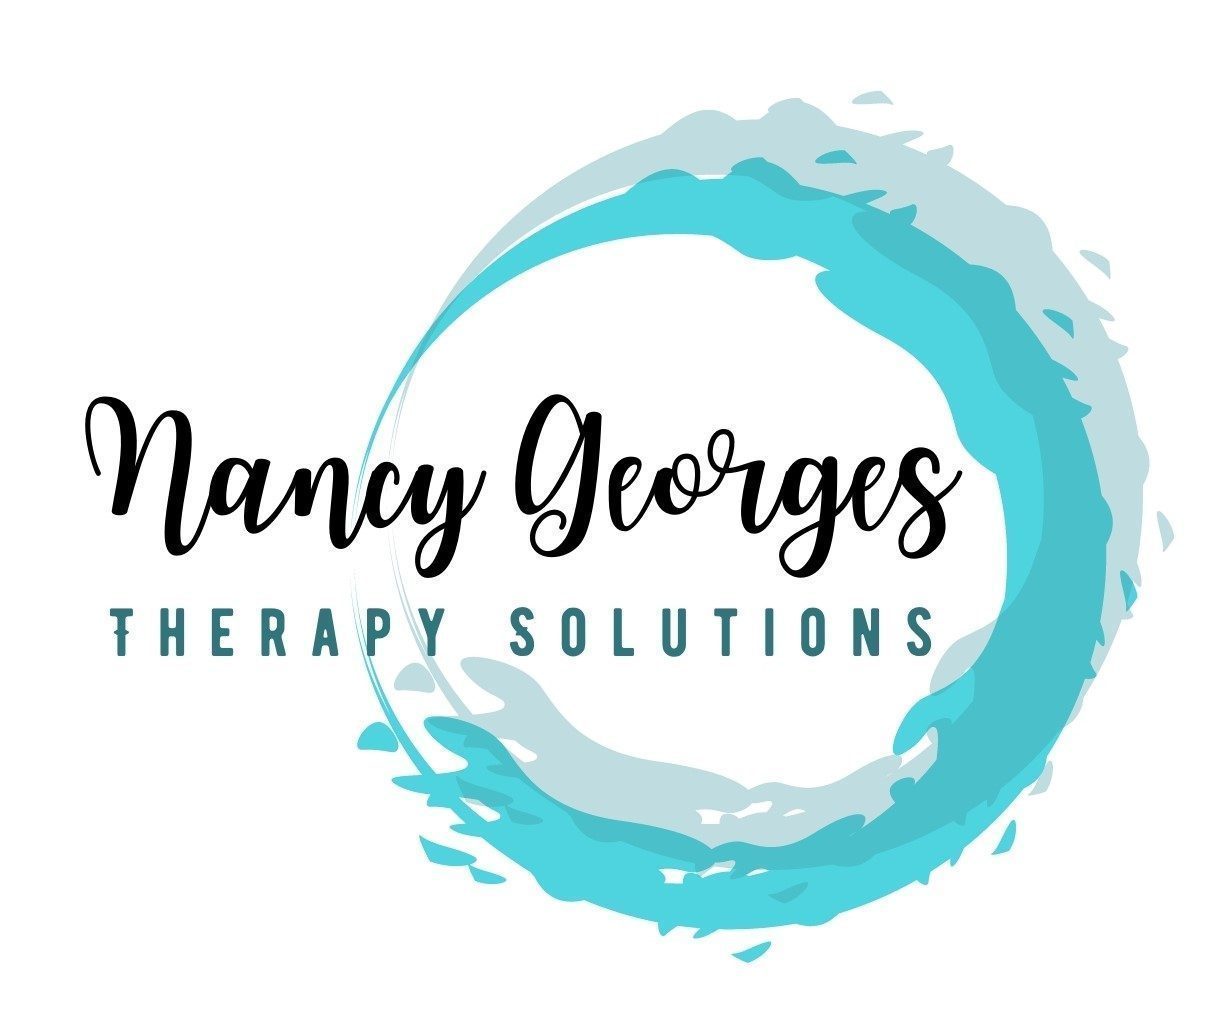 Nancy Georges Therapy Solutions – LMFT Couples Counseling and Individual Therapy in Sacramento